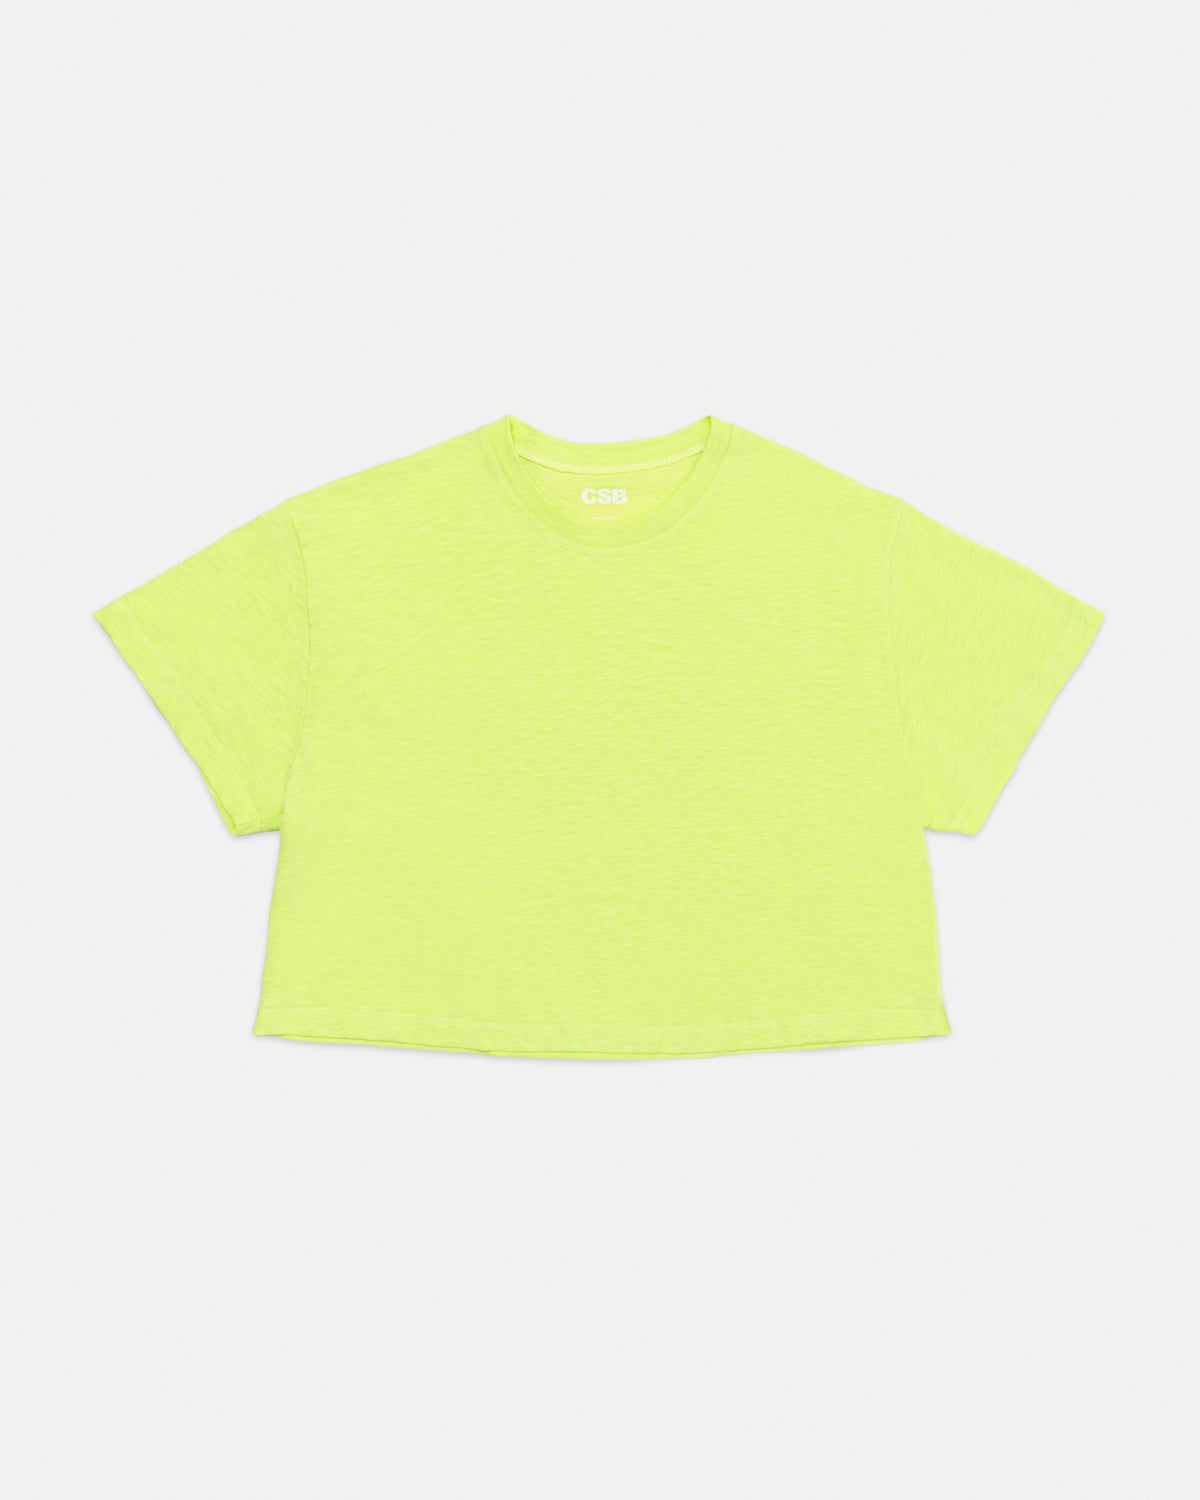 The Neon Cropped T